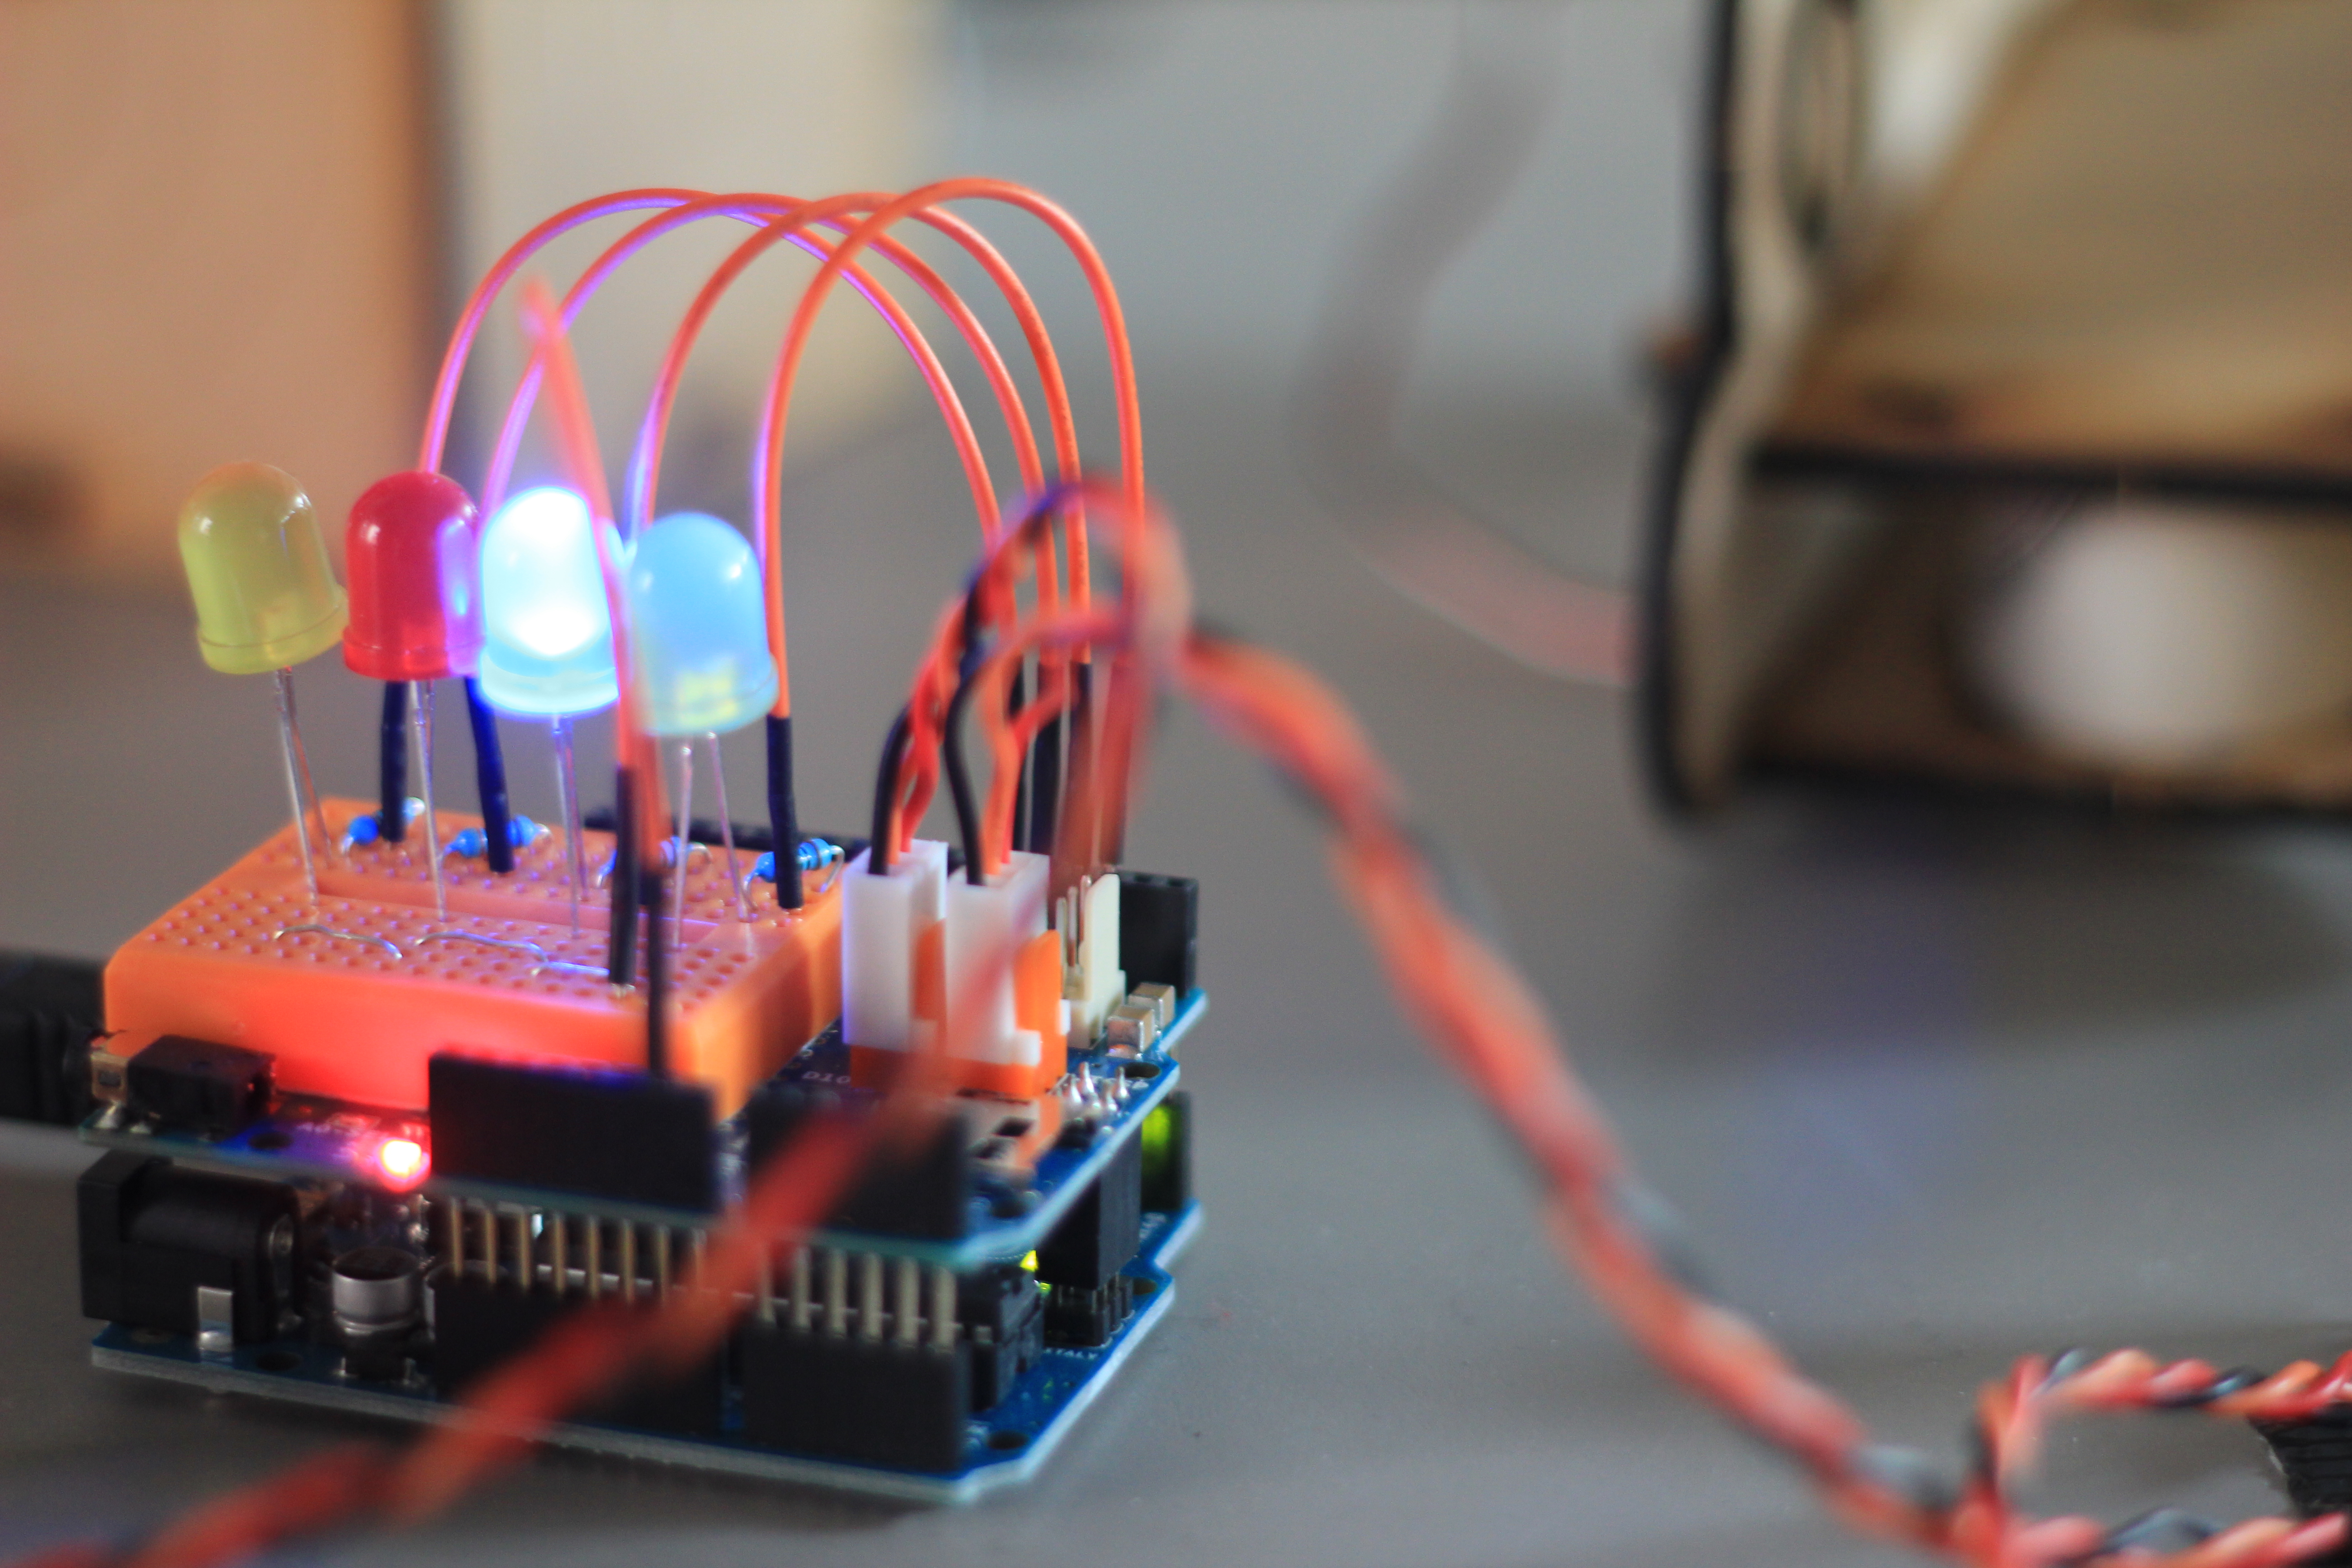 Upcoming Workshop (11/9): Intro to Physical Computing with Arduino